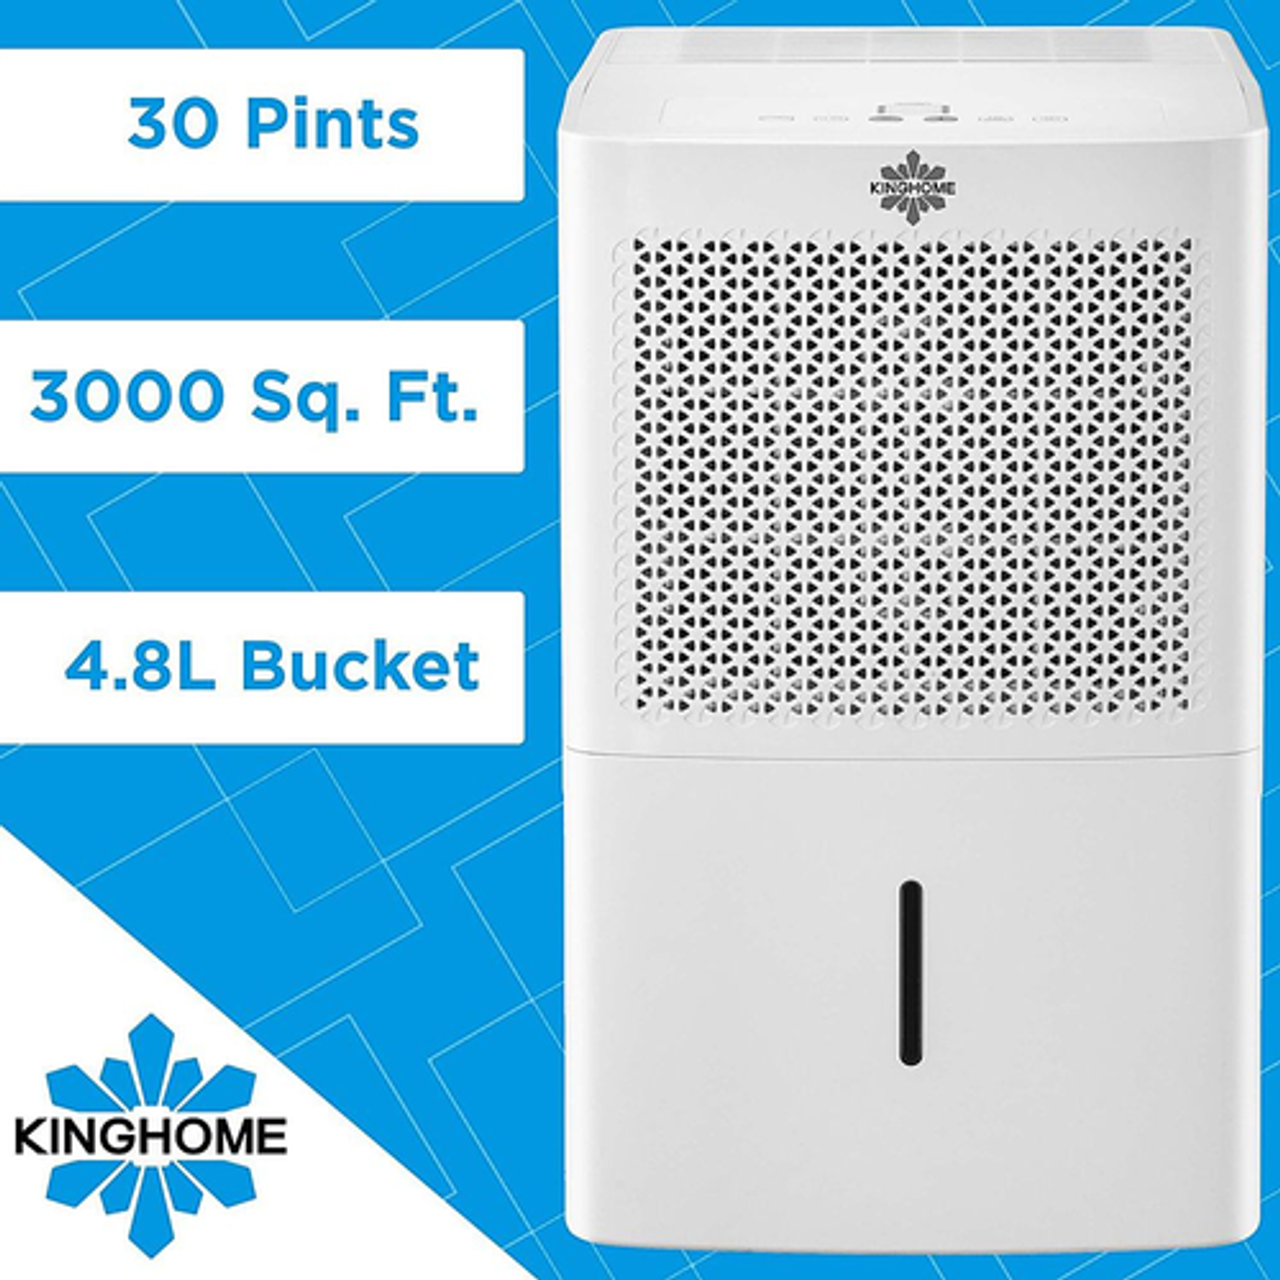 KingHome - 35-Pint Dehumidifier for a Room up to 3000 Sq. Ft. - White